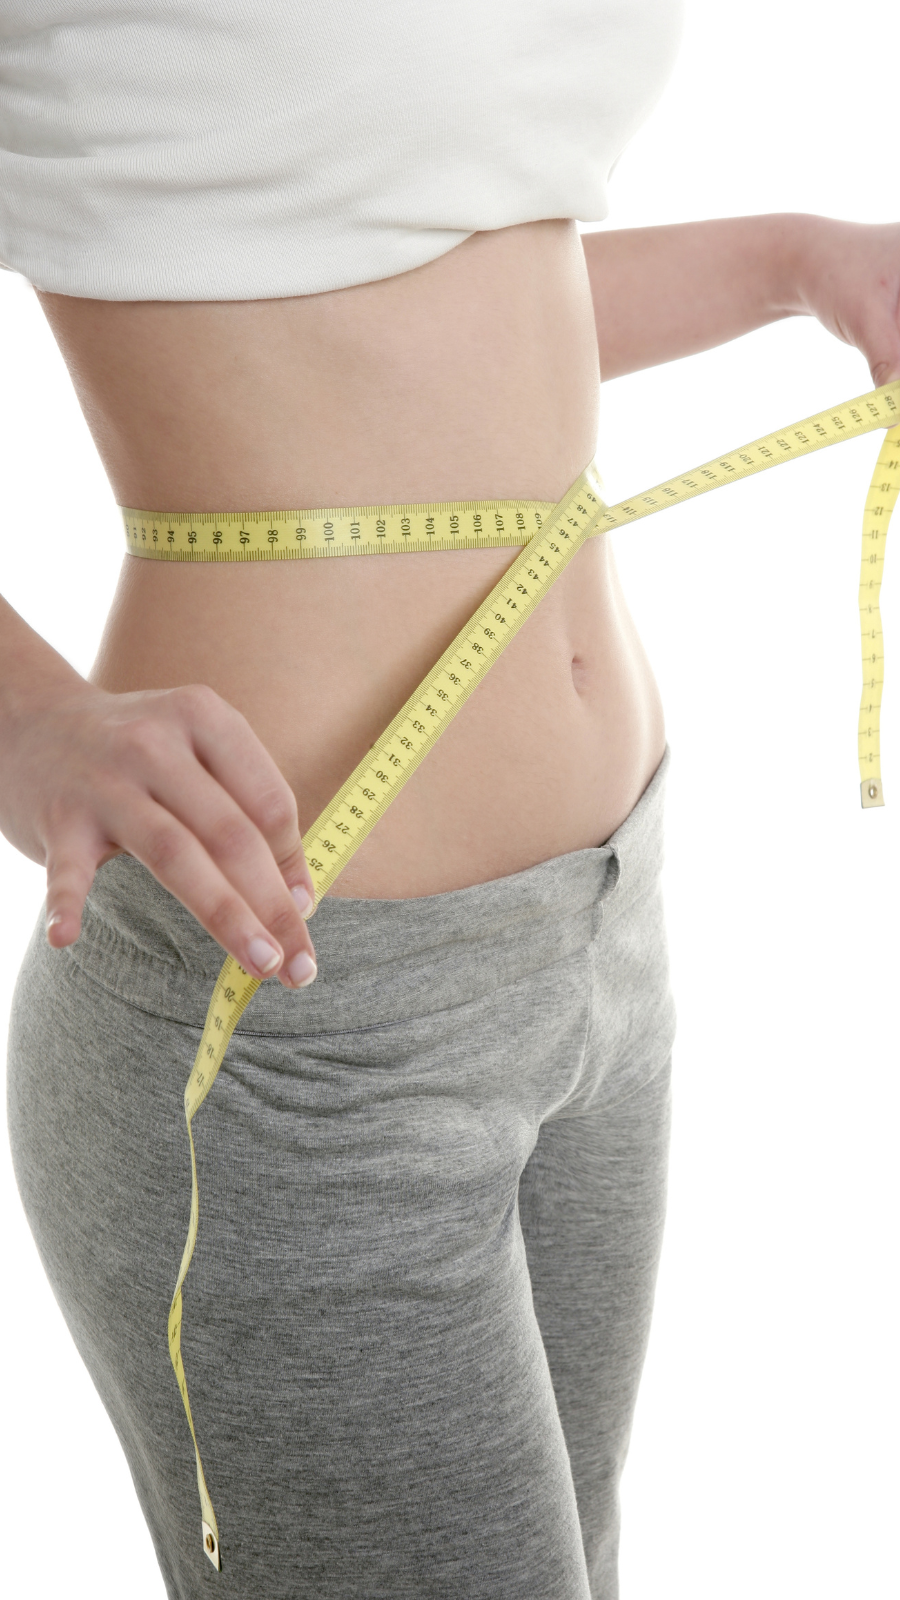 How to reduce belly fat: Expert tips to reduce lower belly fat fast